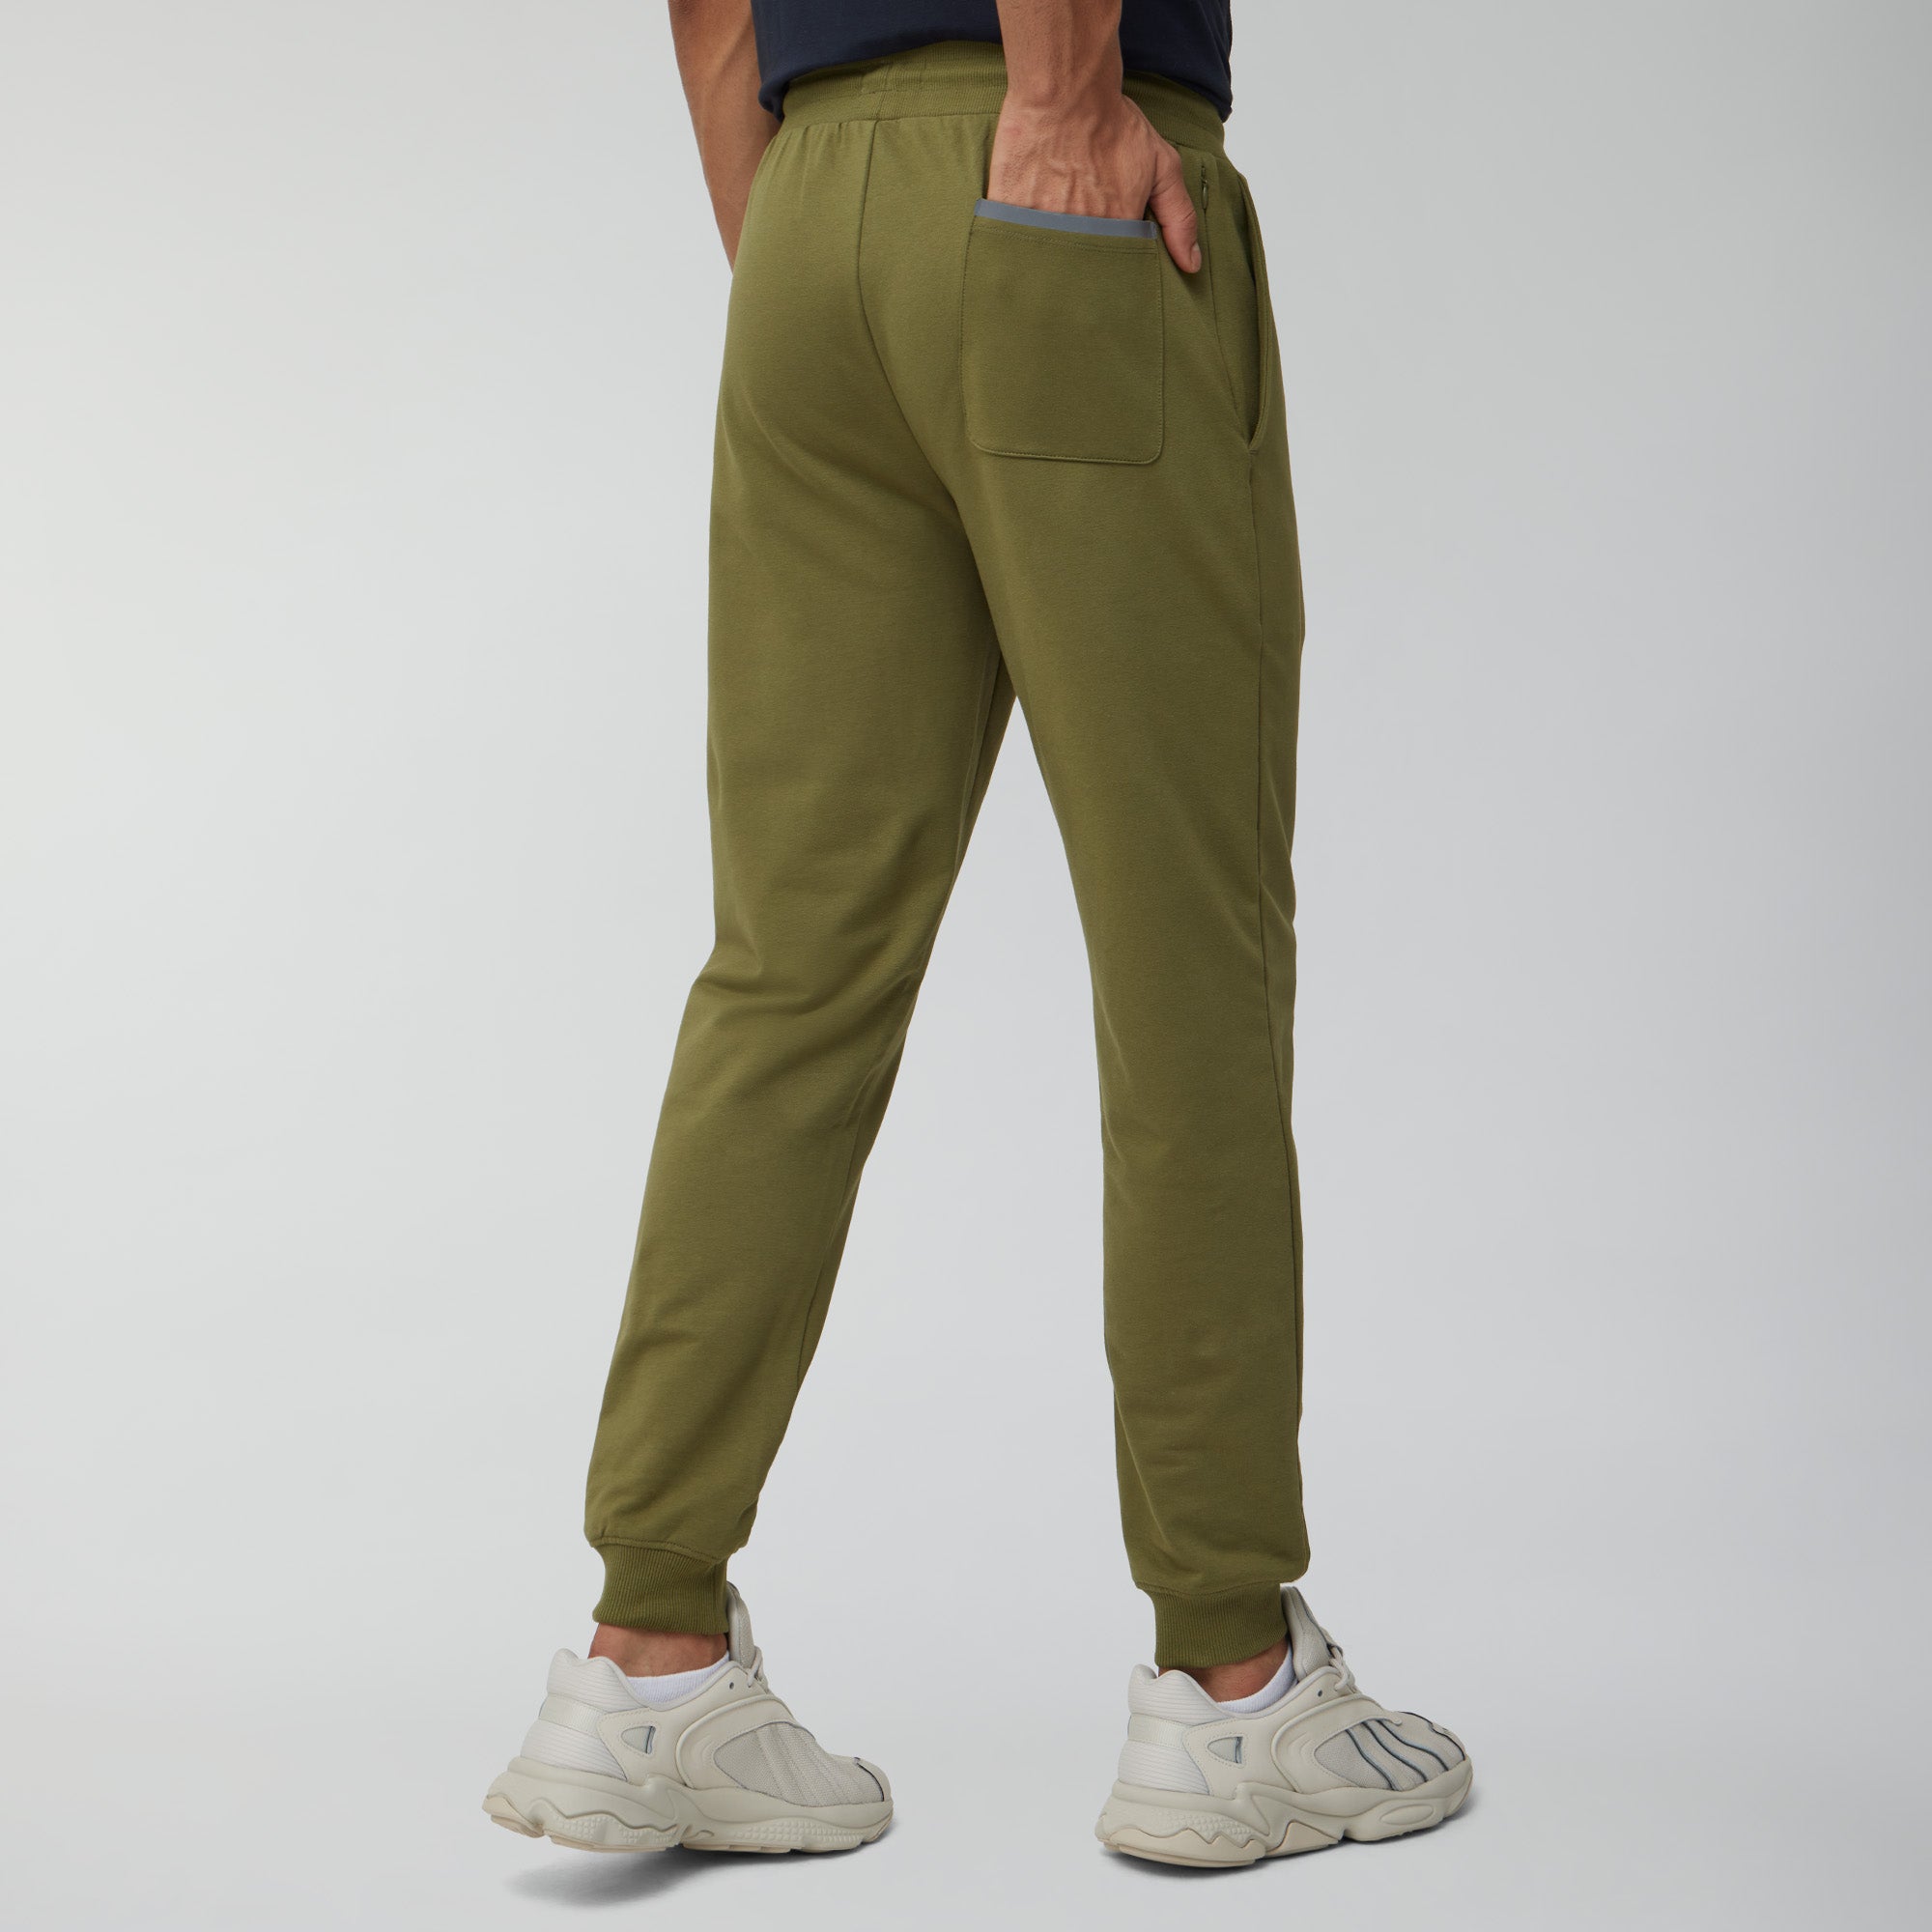 Wearever French Terry Men's Tall Joggers Camo Green